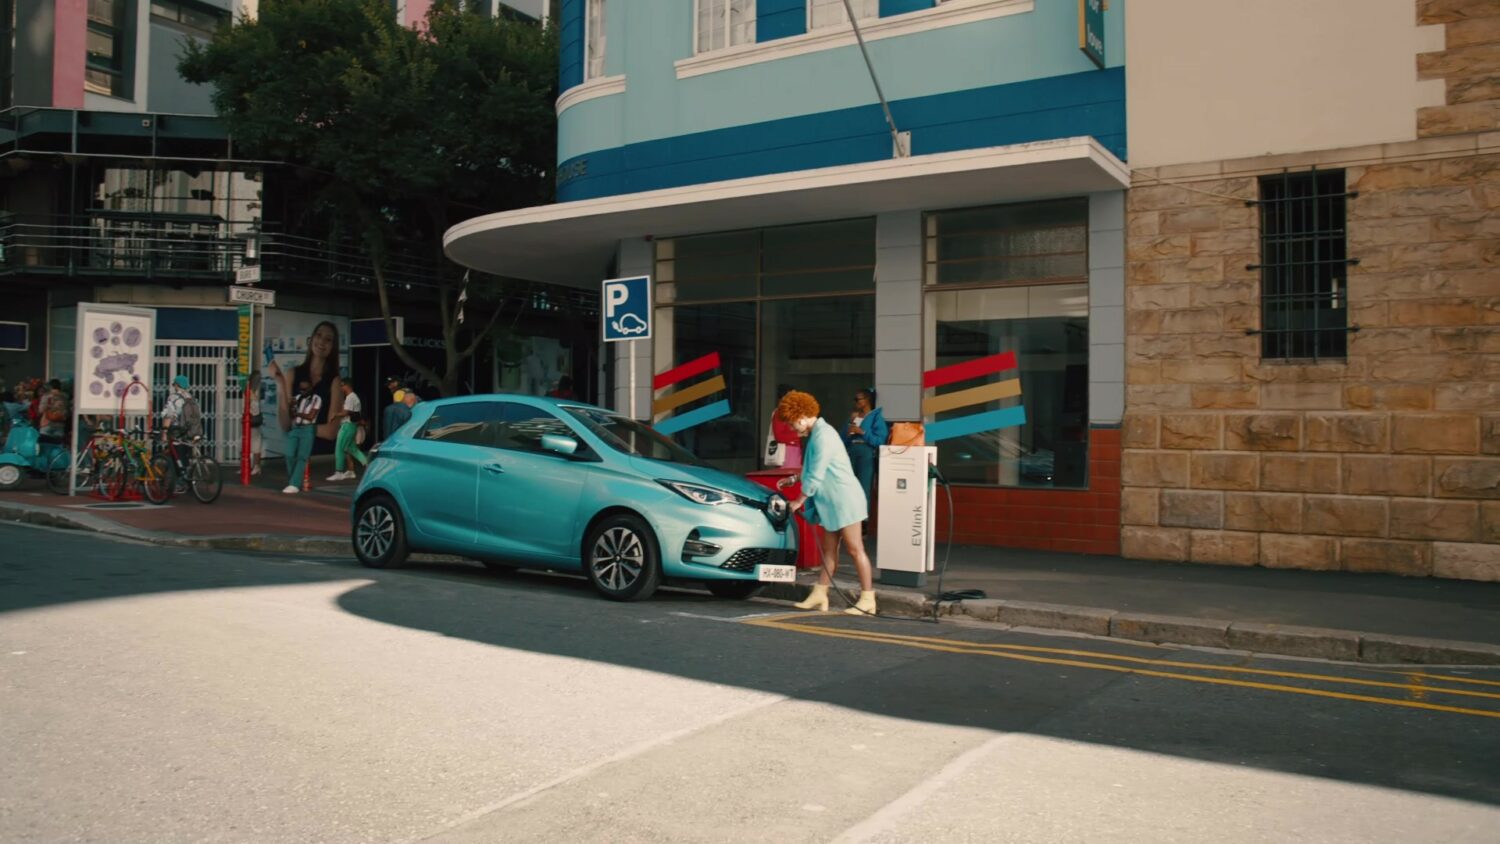 2021 - Renault ZOE advertising campaign - The Chase & Leaving the nest